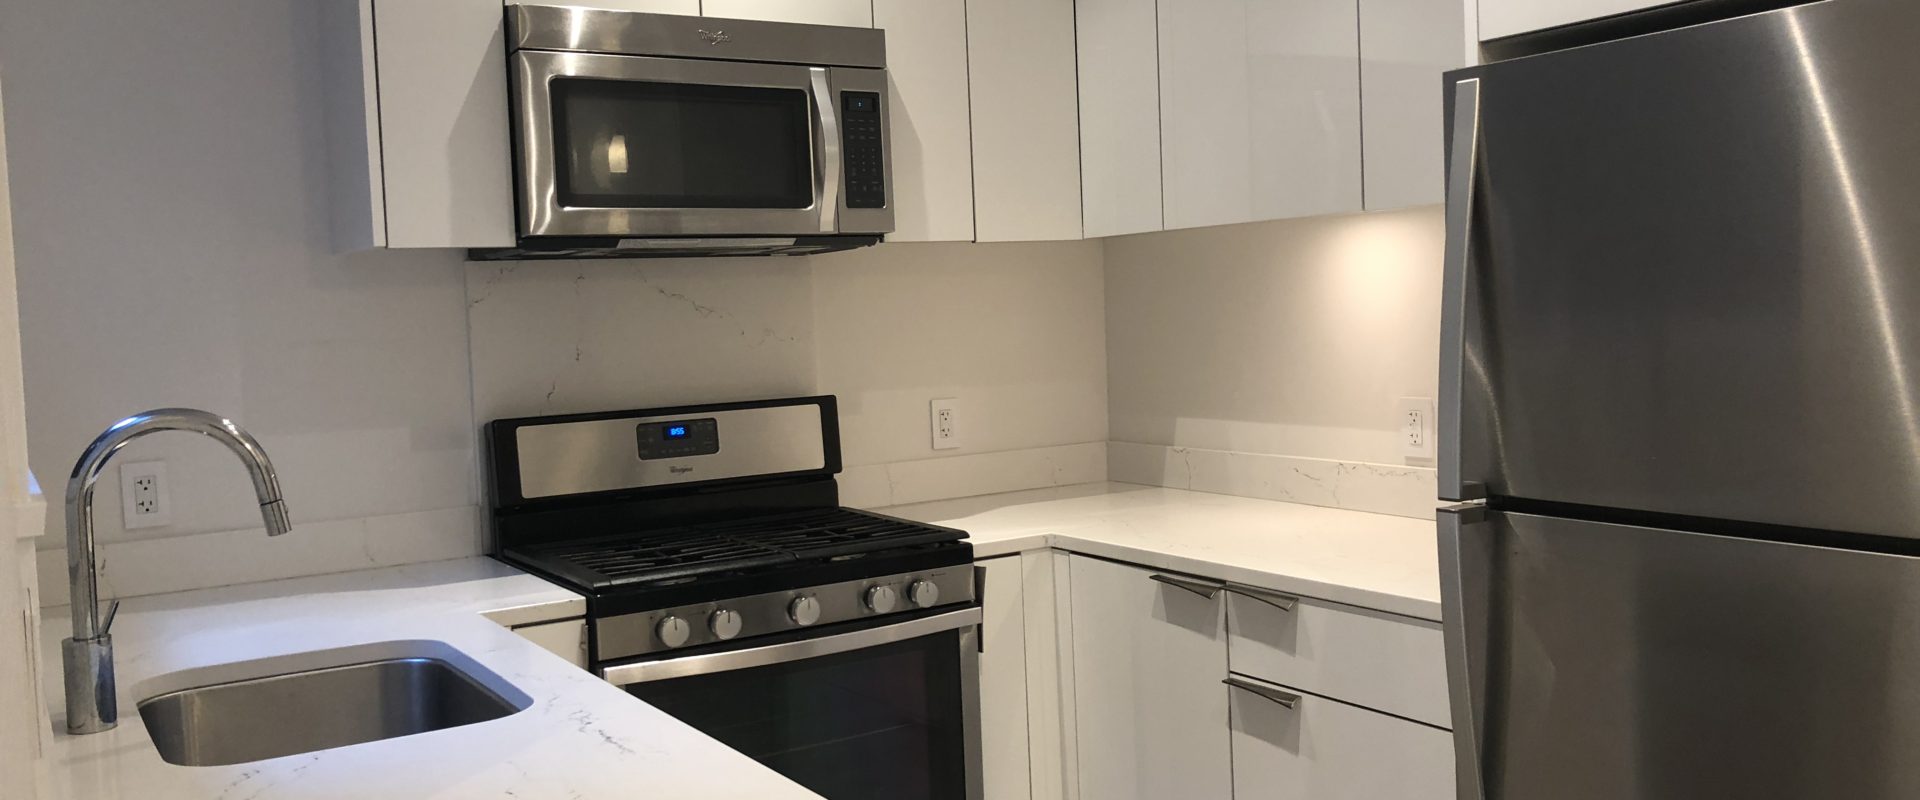 West Vancouver House Brand New Semi-basement with 1br 1ba for Rent